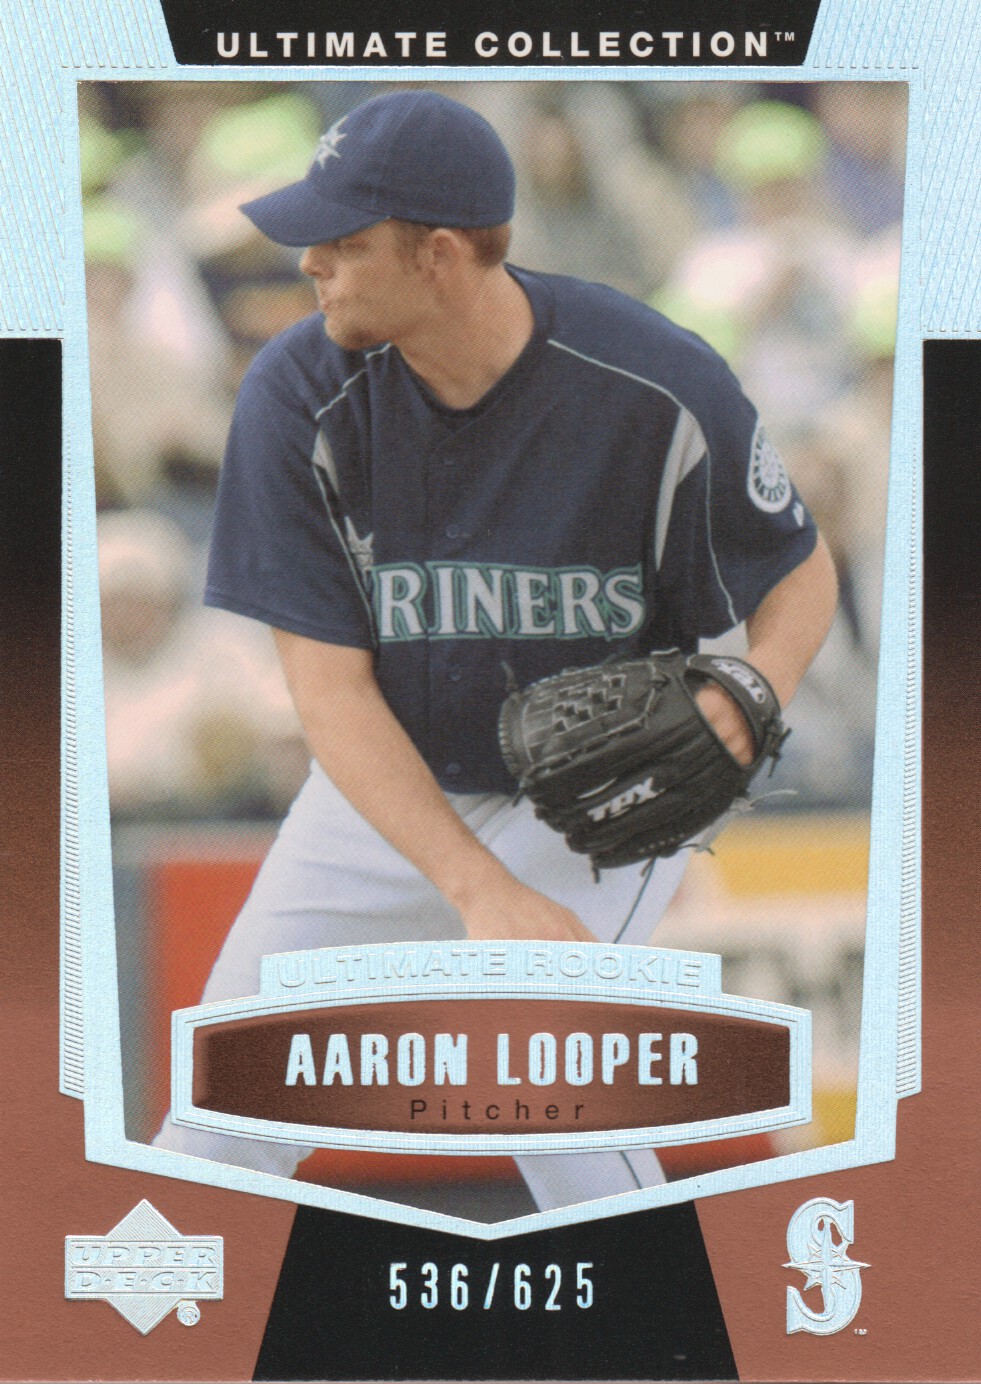 2003 Ultimate Collection #108 Aaron Looper UR T1 RC